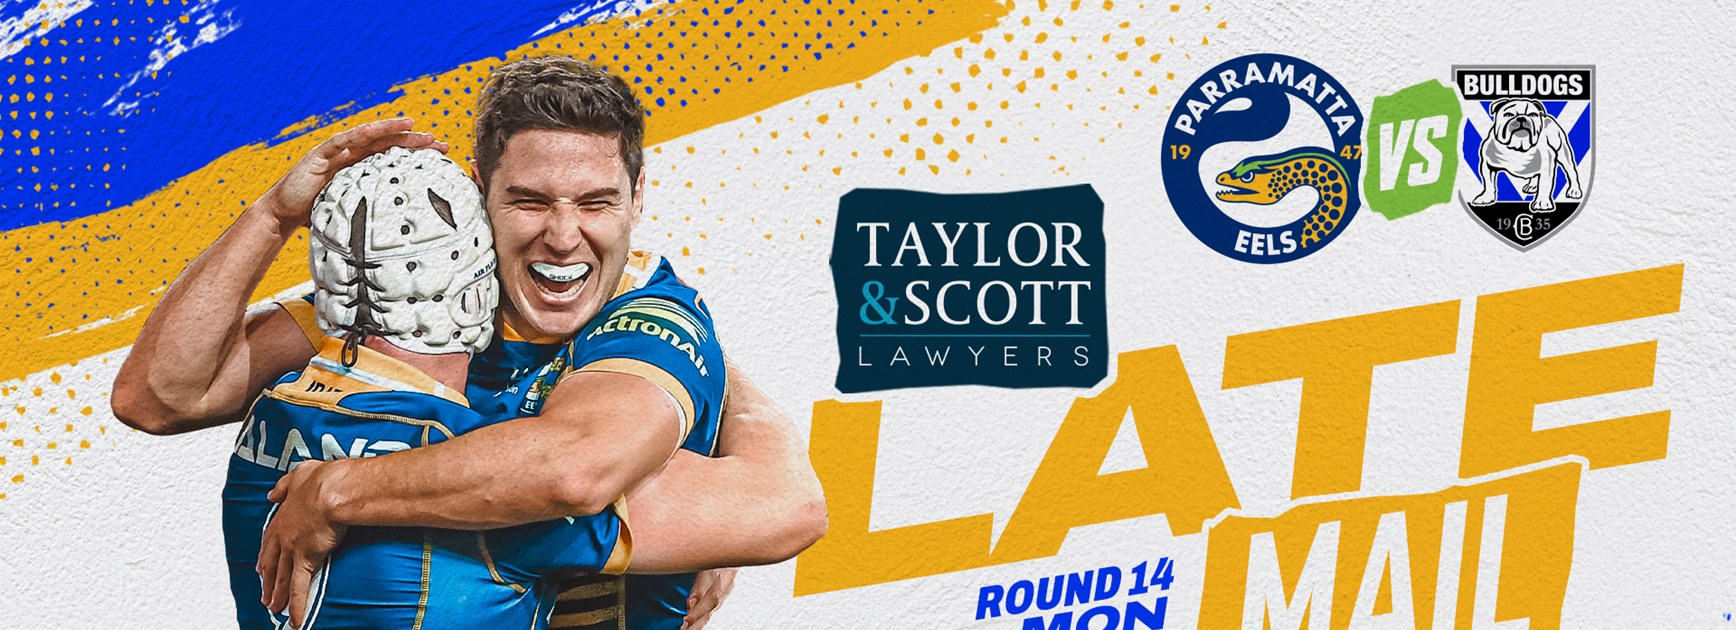 Late Mail - Bulldogs v Eels, Round 14